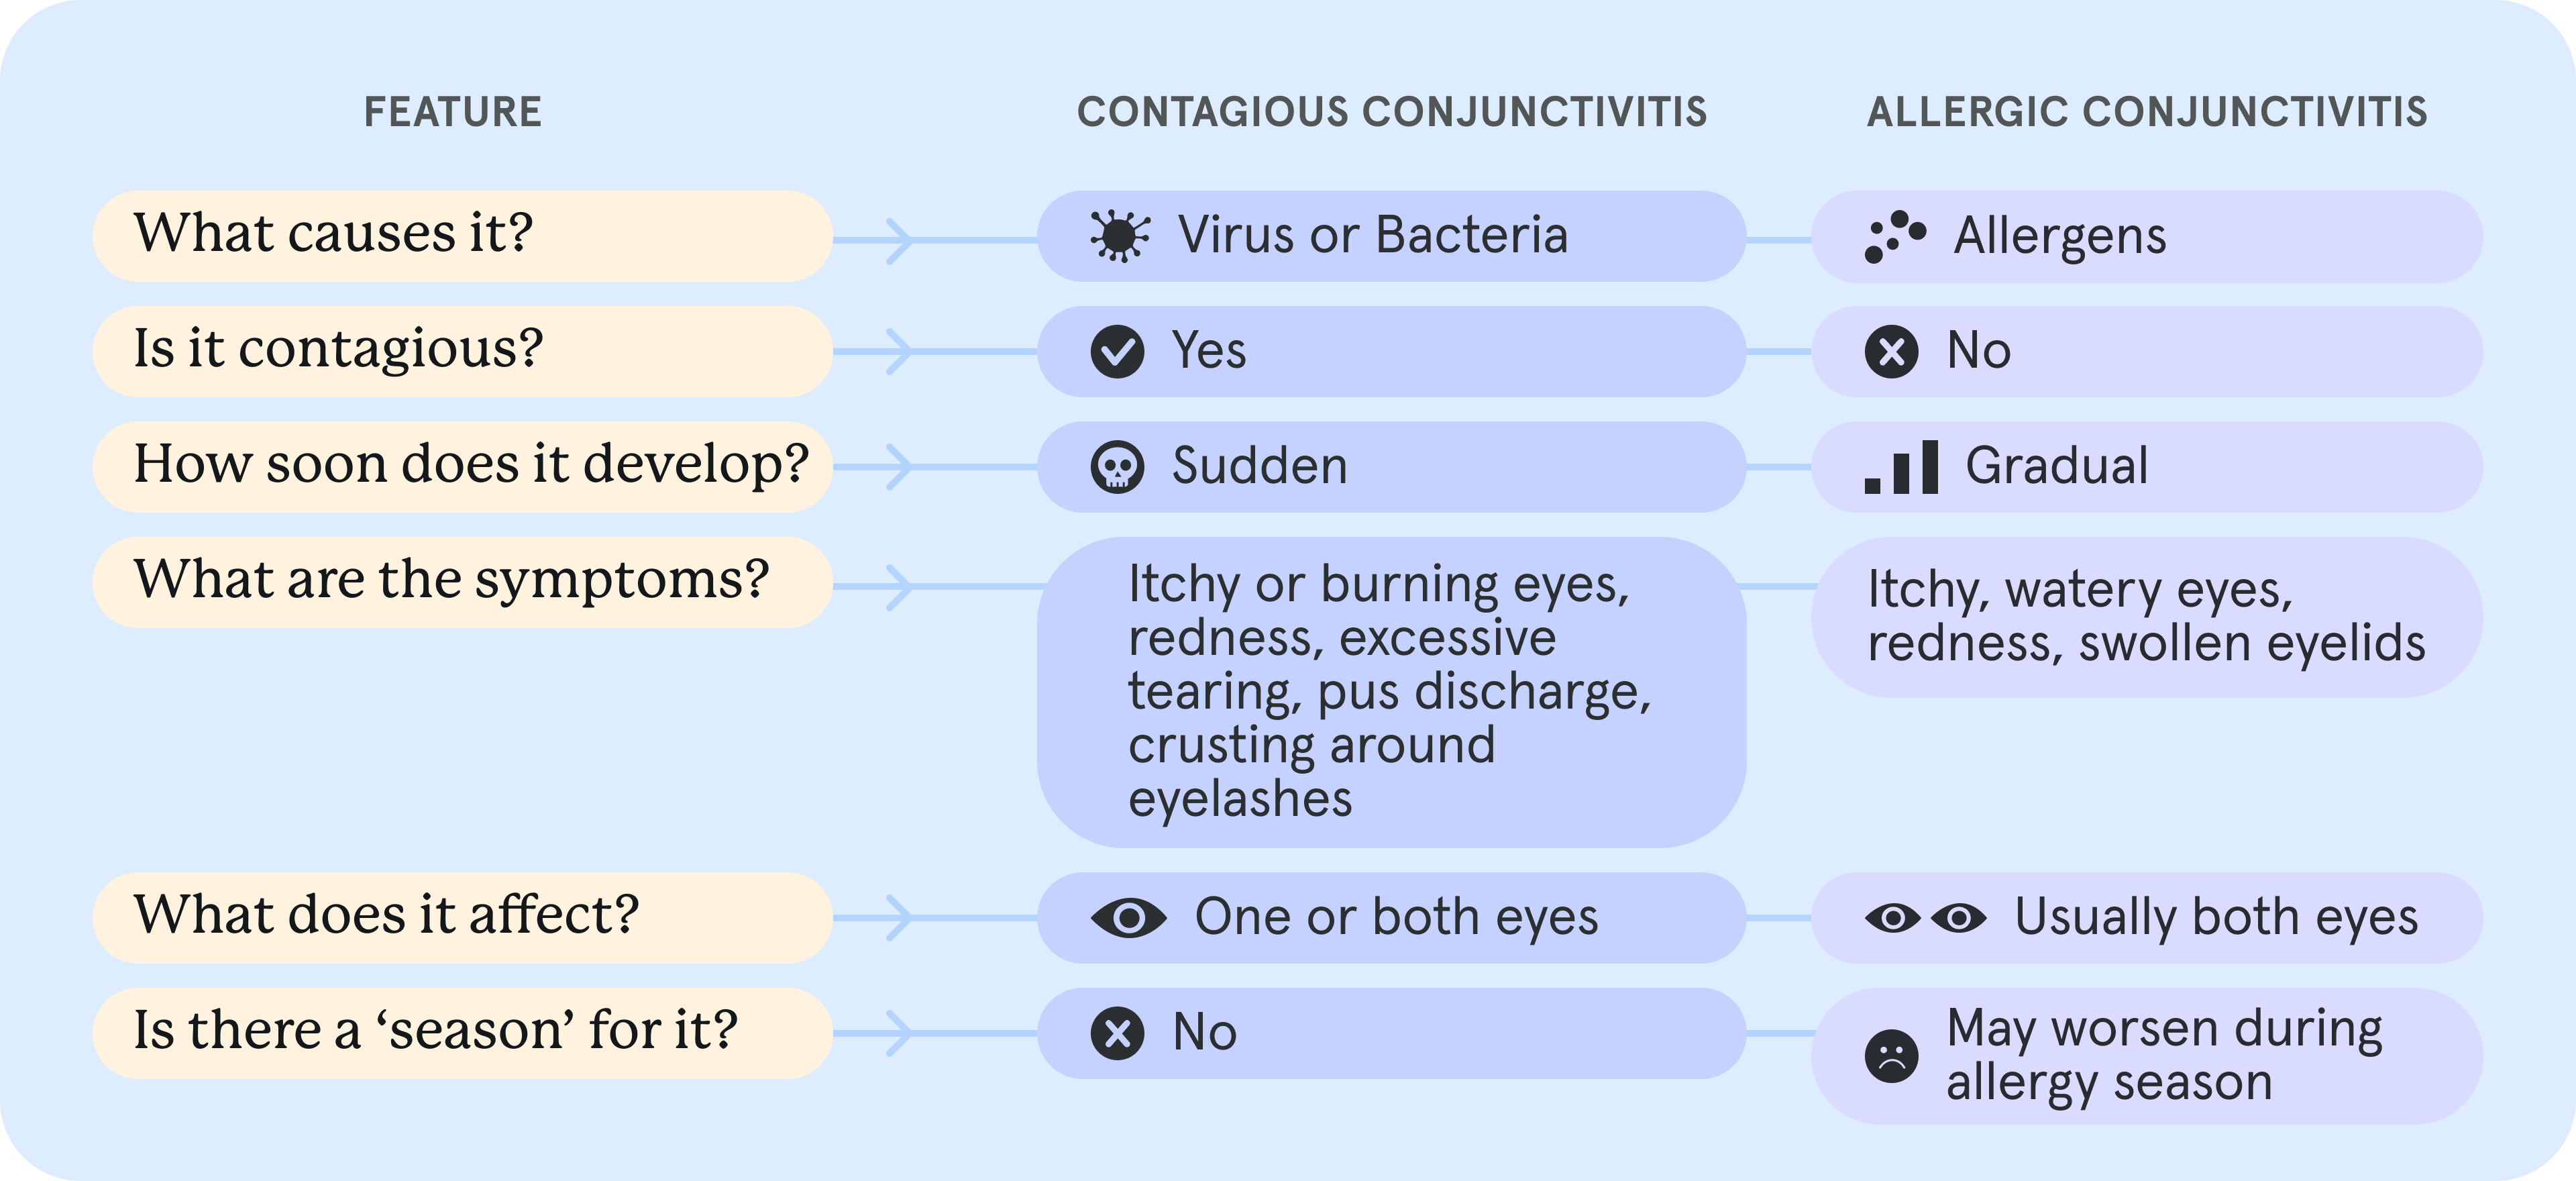 Table explaining difference between contagious and allergic conjunctivitis. 